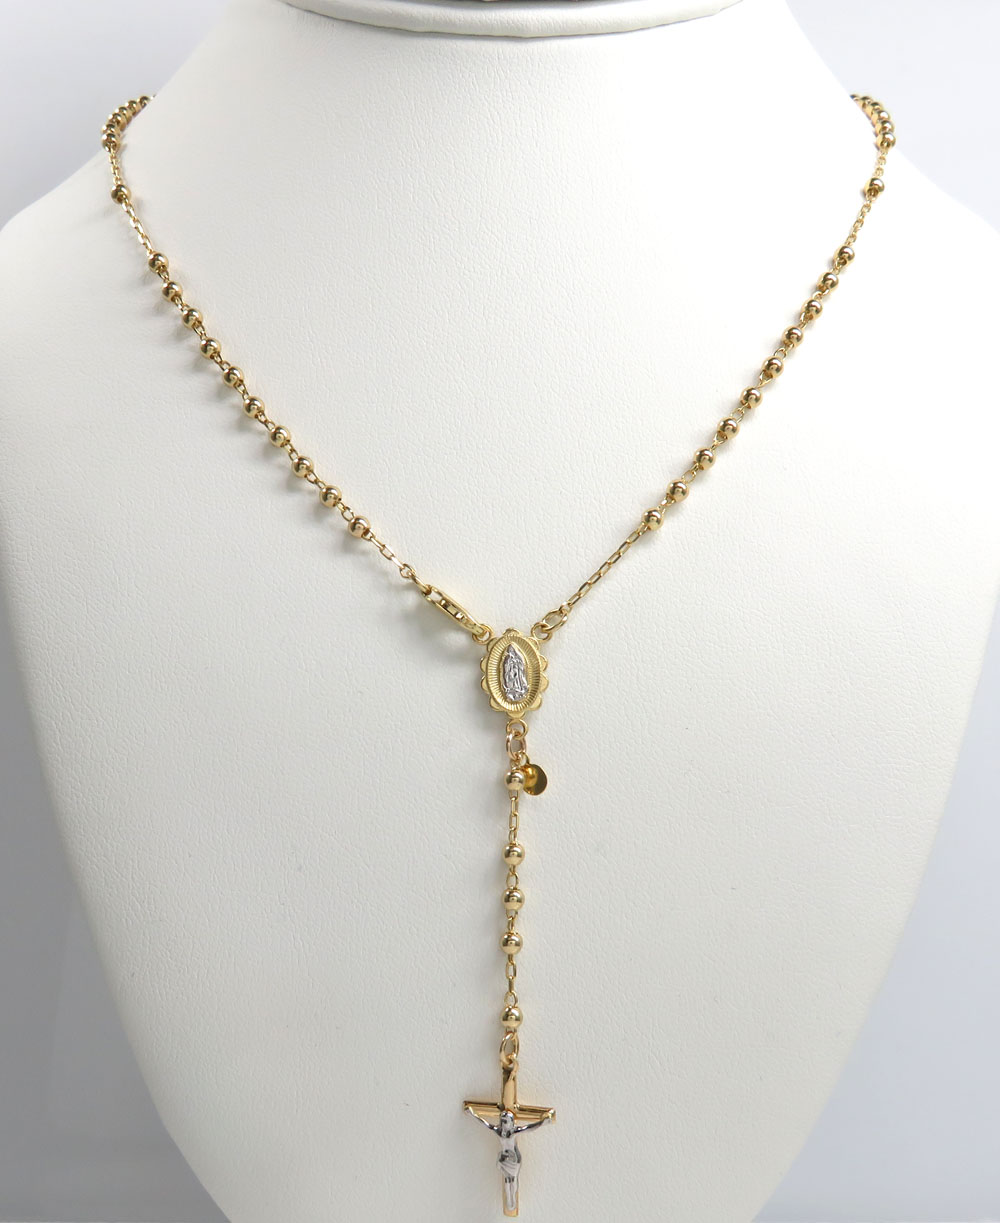 10k yellow gold smooth bead womens/kids rosary chain 17